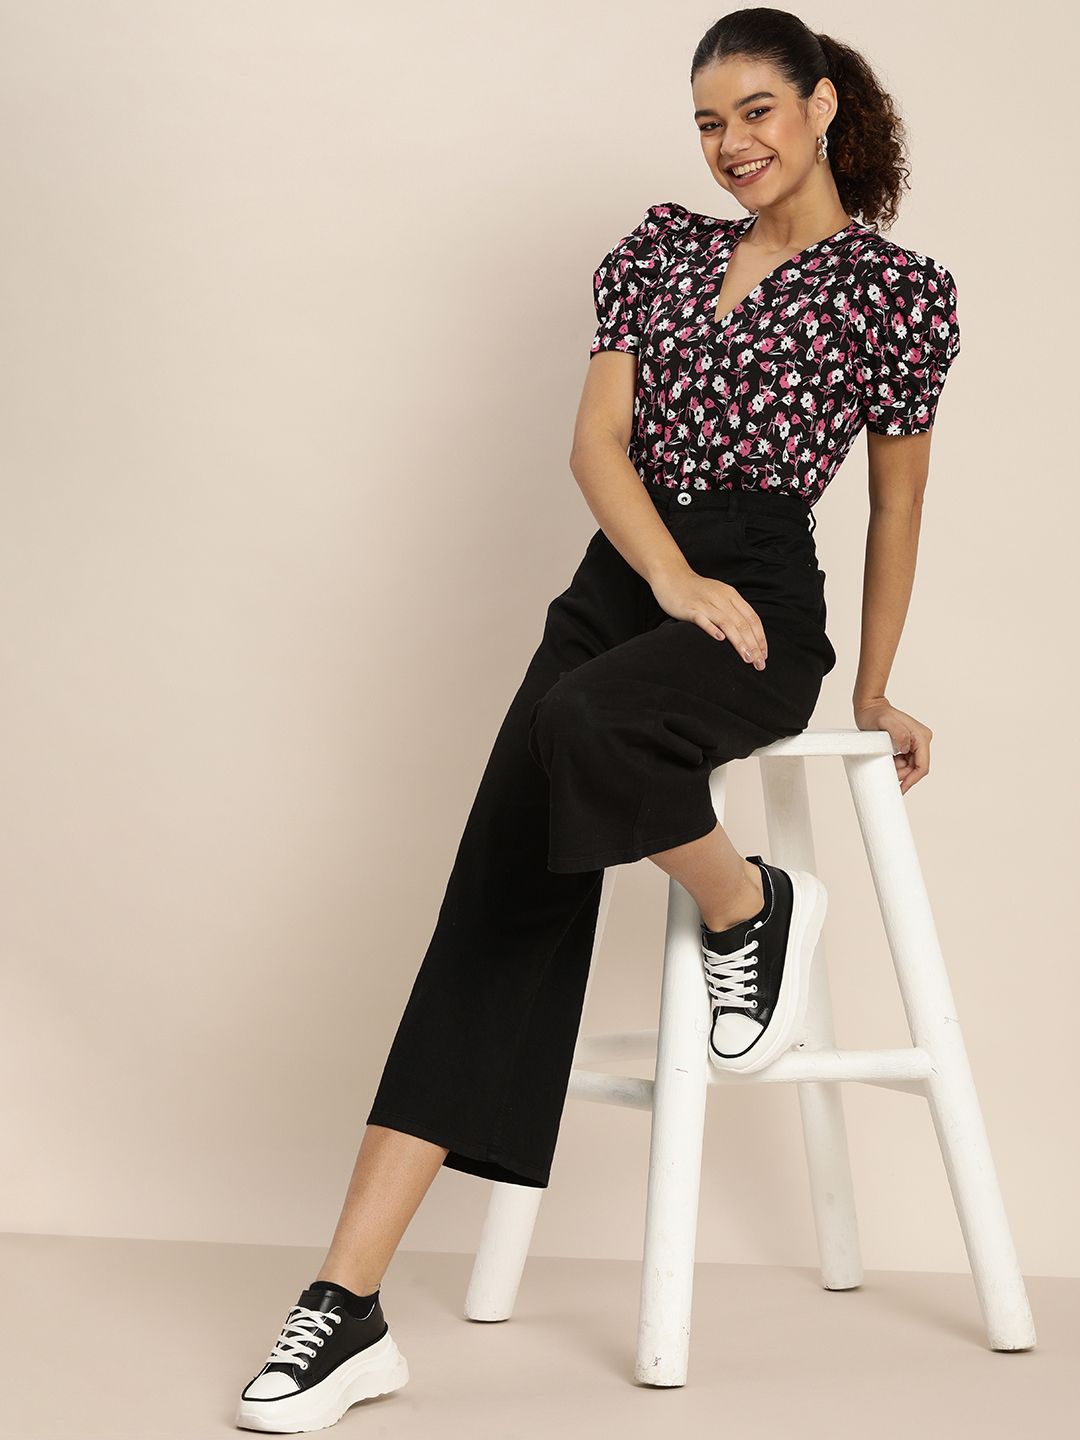 encore by INVICTUS Black & Pink Floral Print V Neck Puff Sleeves Regular Top Price in India